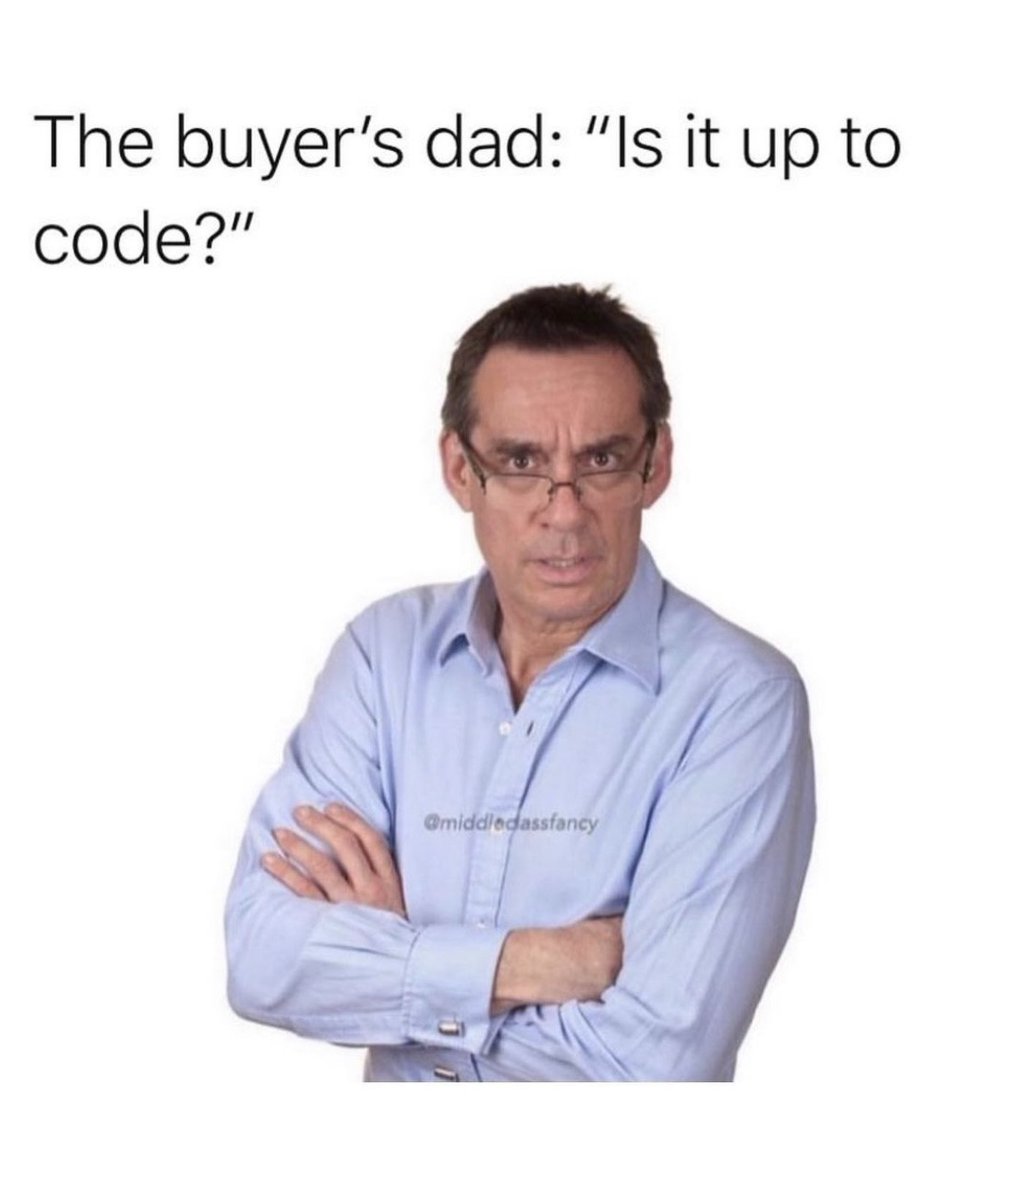 Happy Father's Day from Maddox & Co. Realtors! 

#MaddoxRealtors #IsItUpToCode #FathersDay #RealEstate #RealEstateHumor #Buy #Sell #Invest #MaddoxRewards #NewMexico #Albuquerque #RioRancho